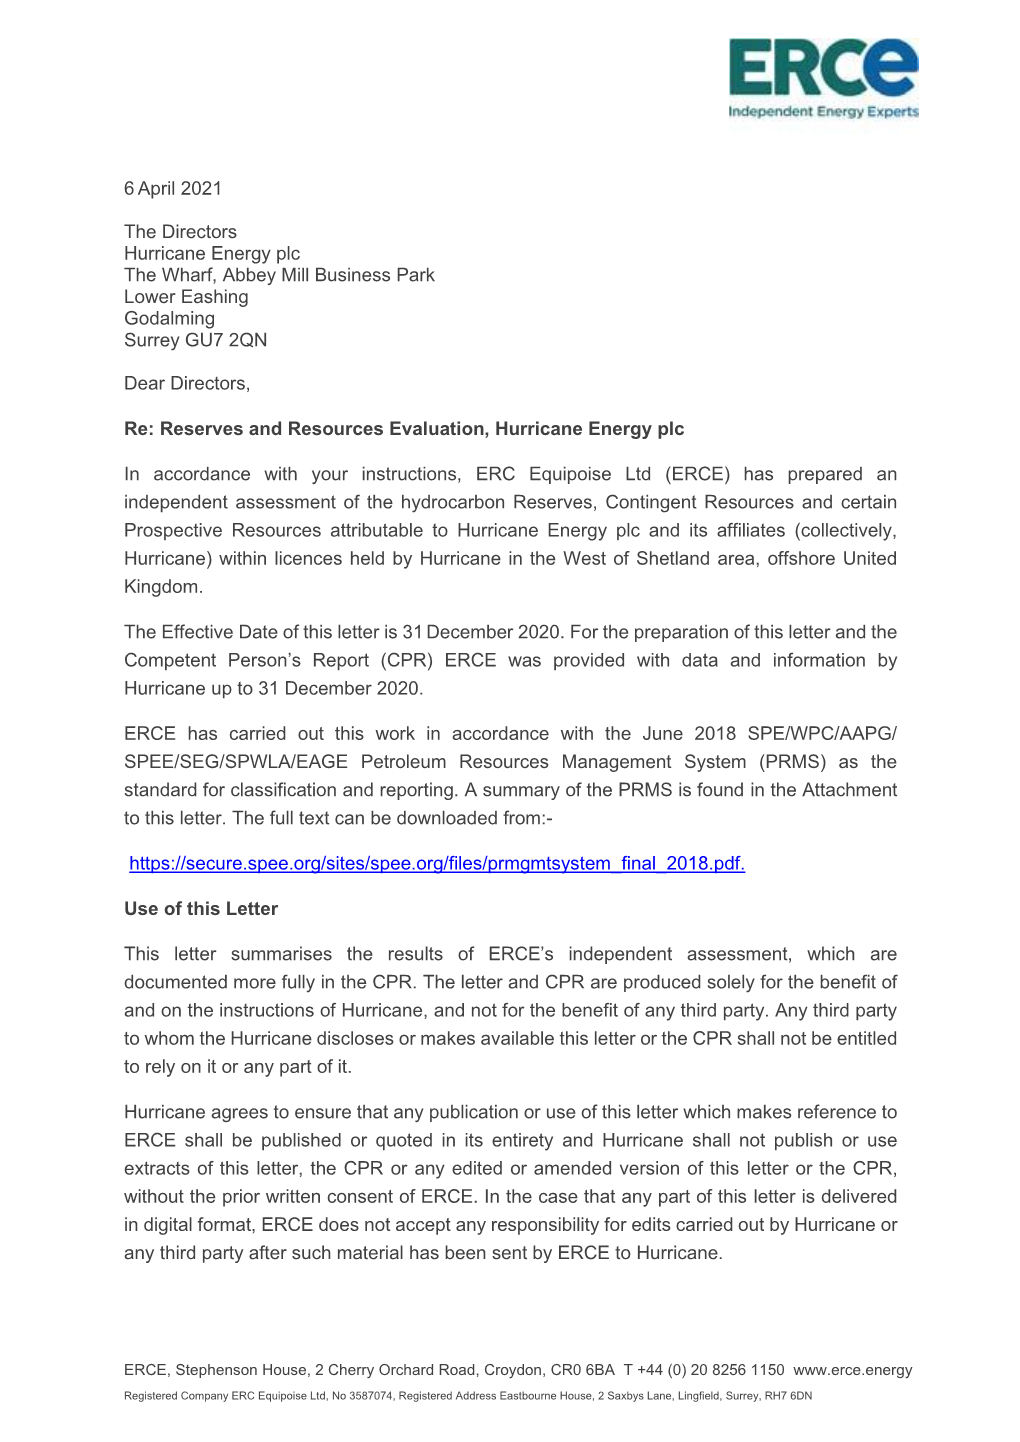 Evaluation of the Reserves and Resources of Hurricane Energy Plc